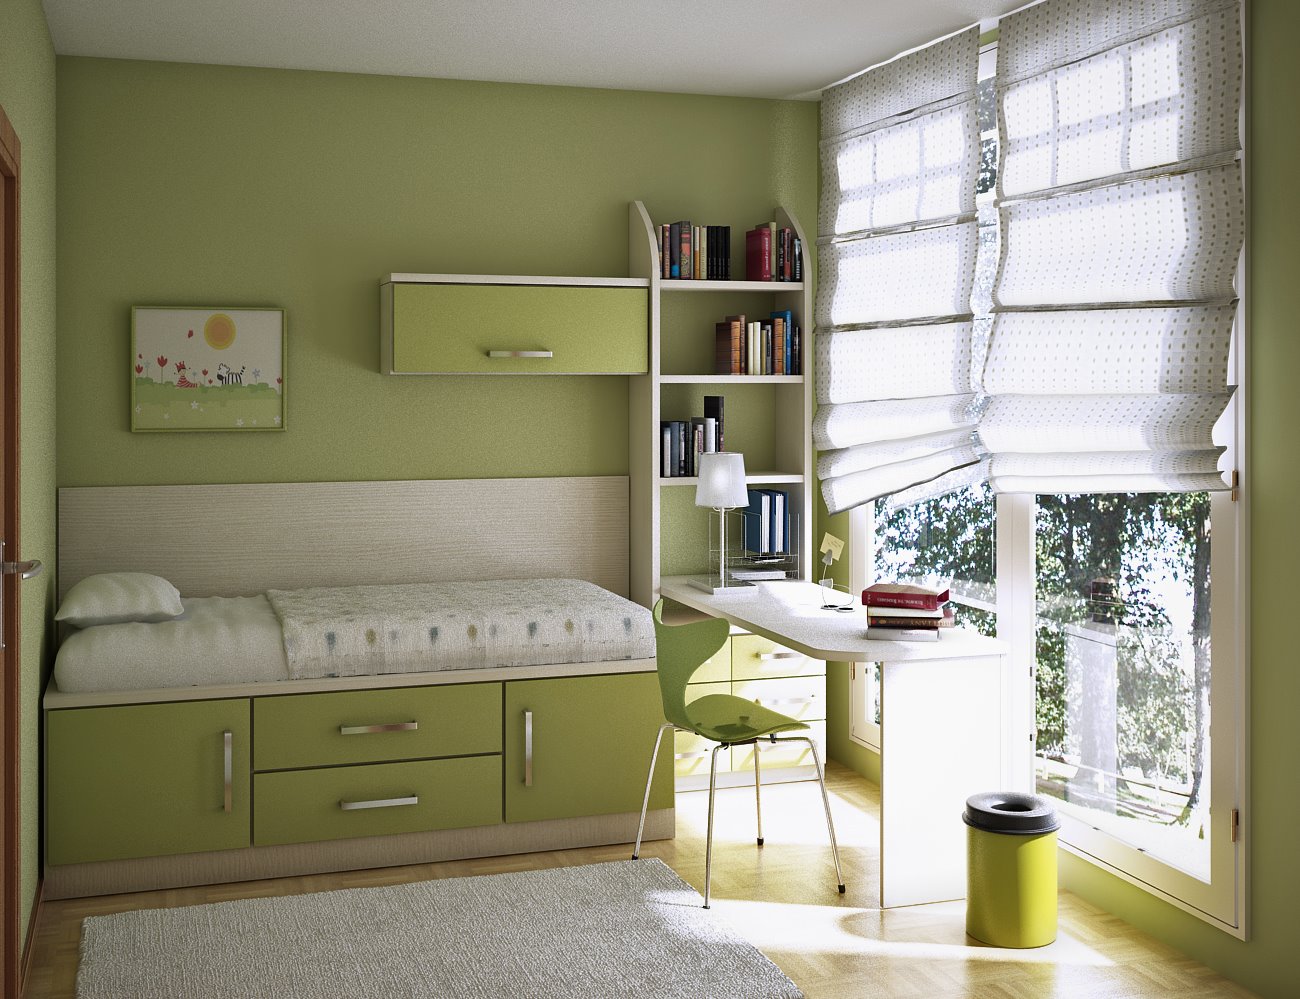 wonderful-uncategorized-excellent-olive-green-small-bedroom-for-teenage-girl-with-perfect-space-saving-cabinet-and-study-table-beautiful-small-bedroom